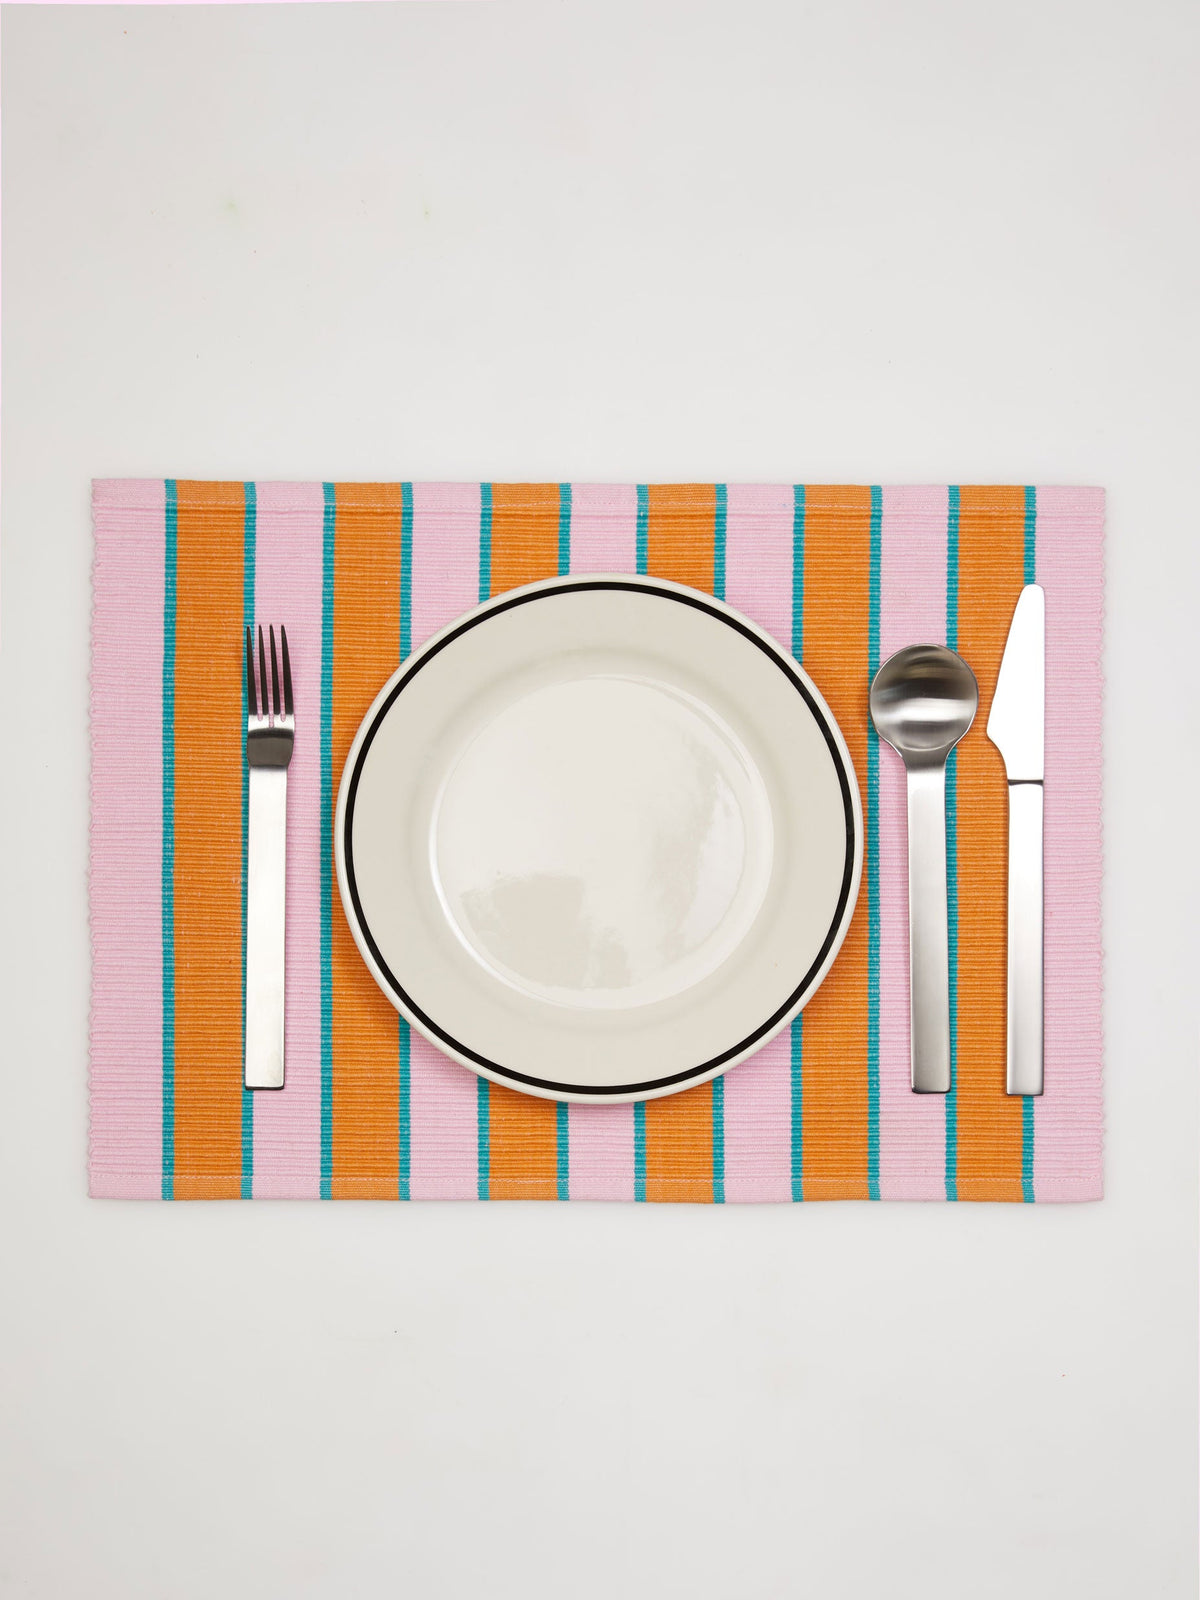 Dusen Dusen Proscuitto Striped Placemat. Cotton placemats in tri-color stripes with a ribbed texture. 100% cotton, 12" x 18". Machine wash cold and lay flat to dry. Spot clean as needed. Made in India.